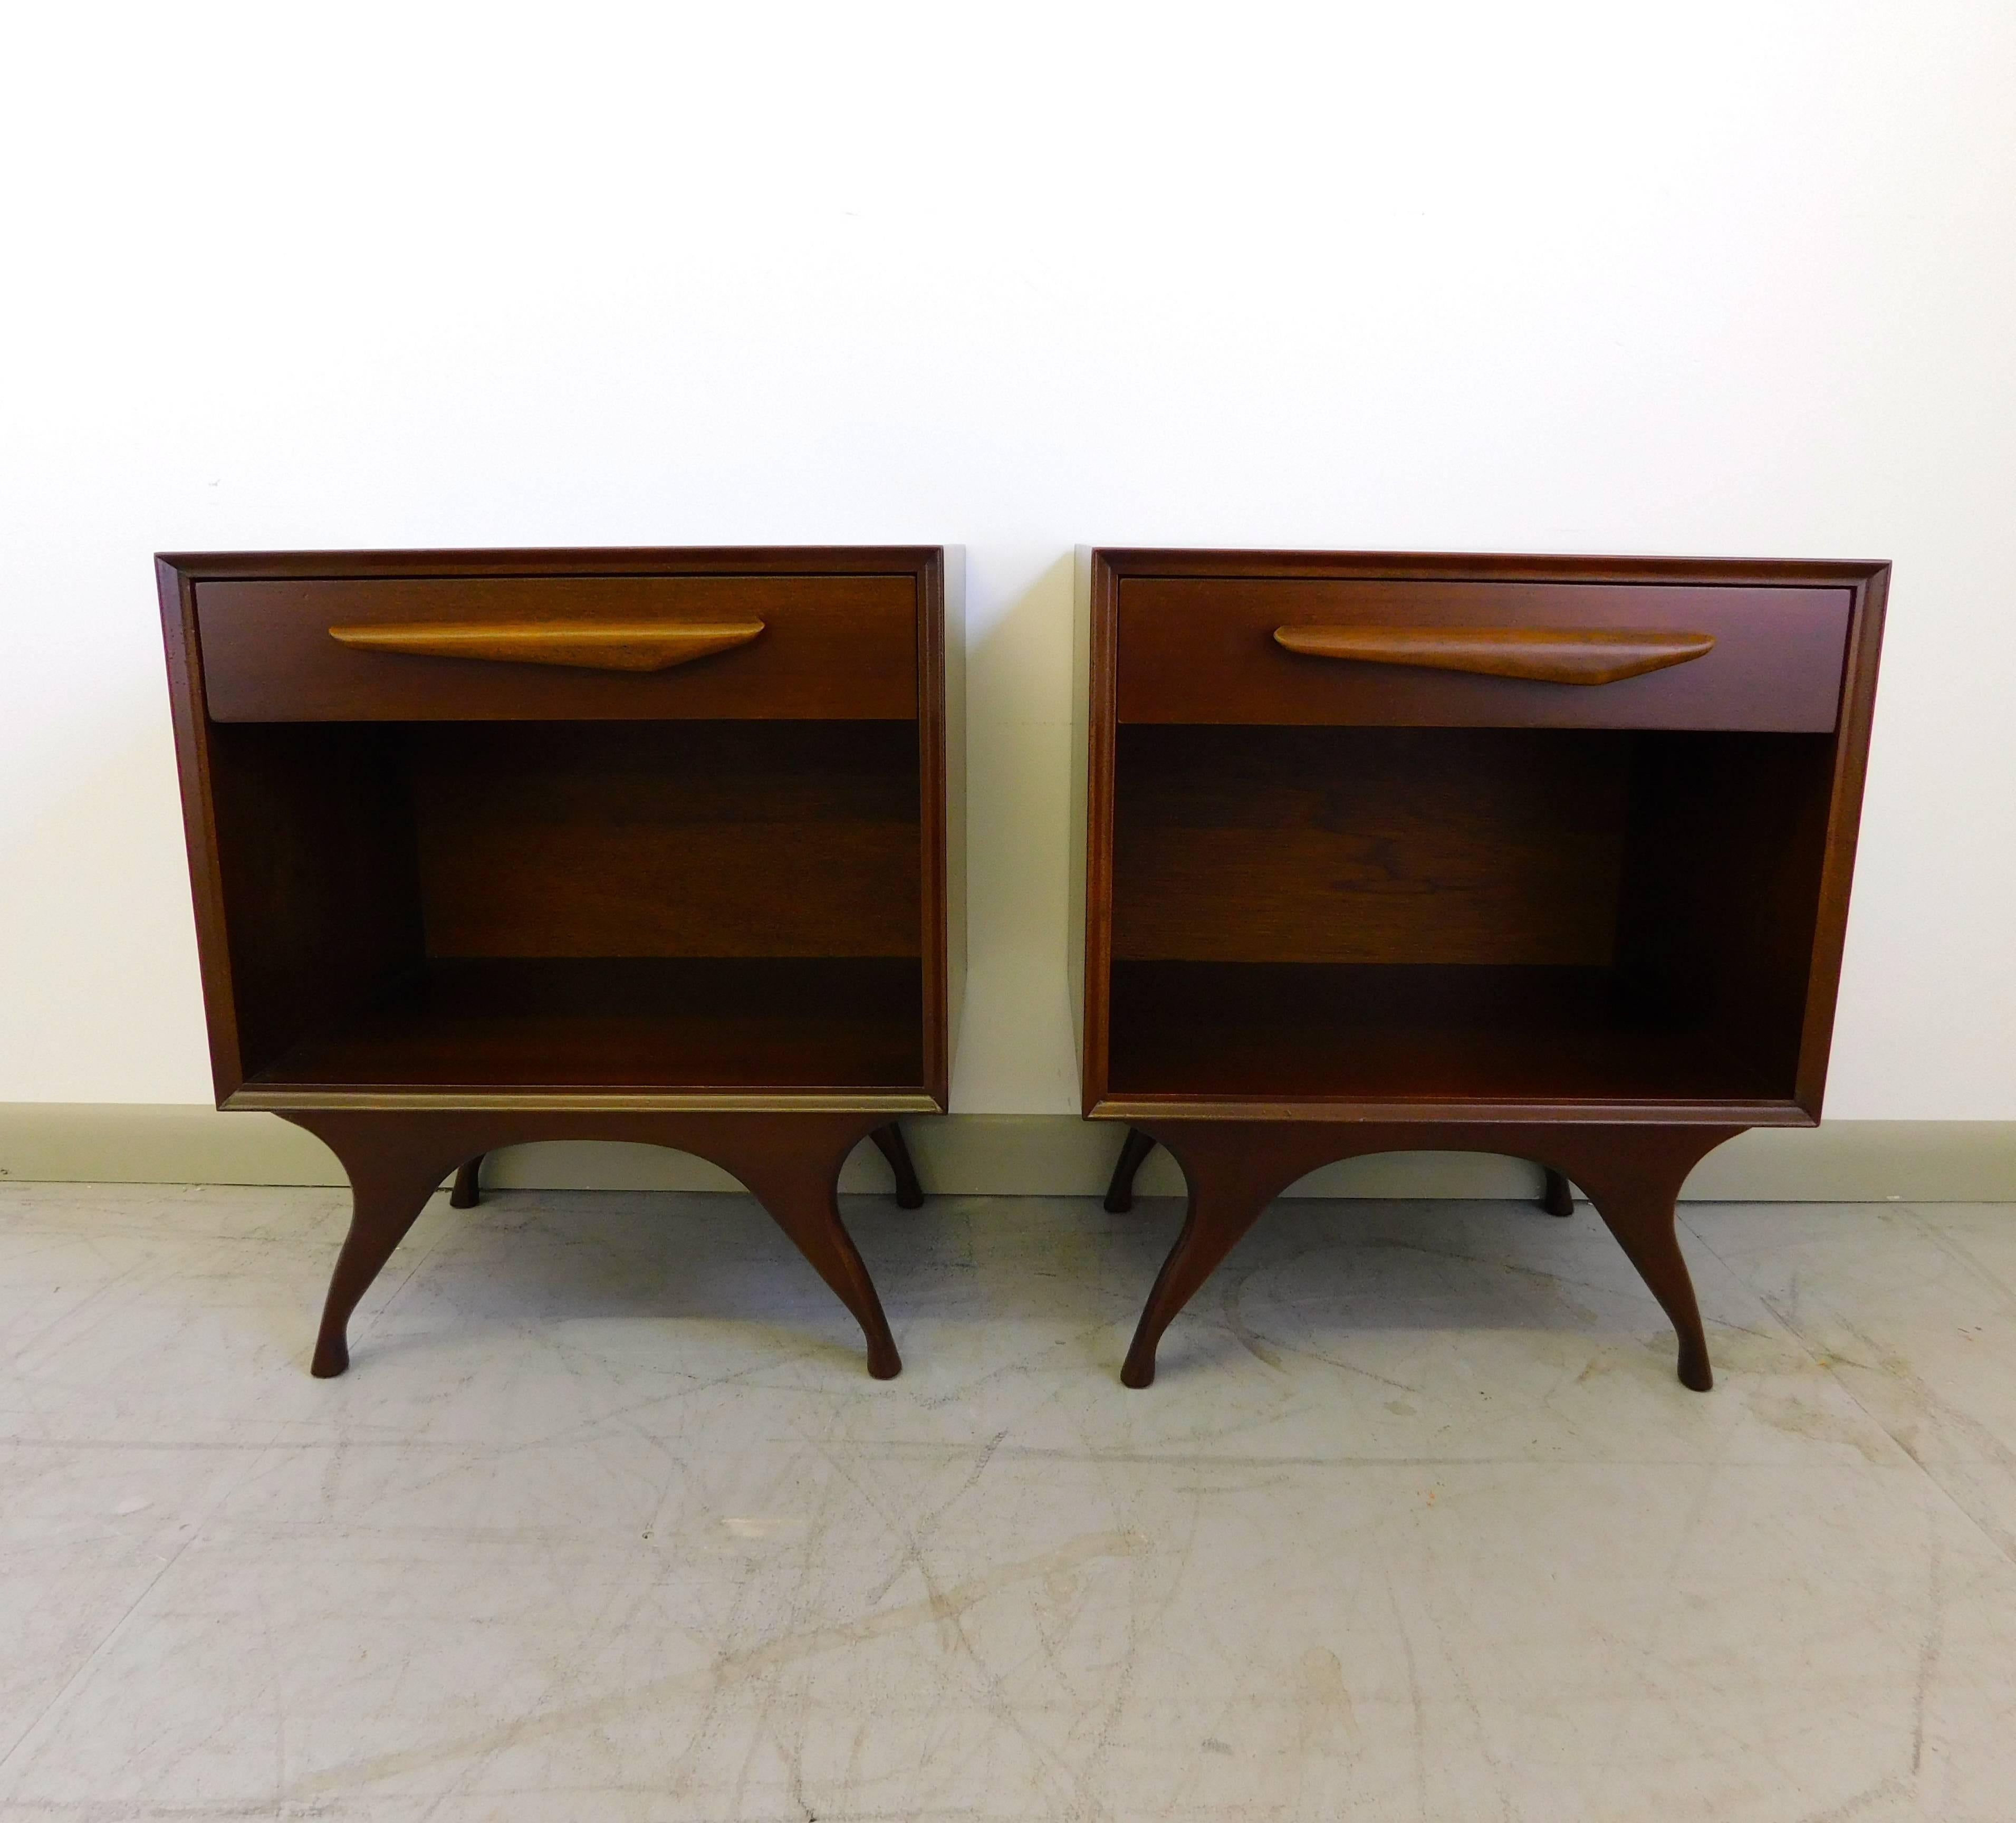 Gorgeous pair of sculptural American walnut nightstands attributed to Albert Parvin, circa 1950s. Newly restored.